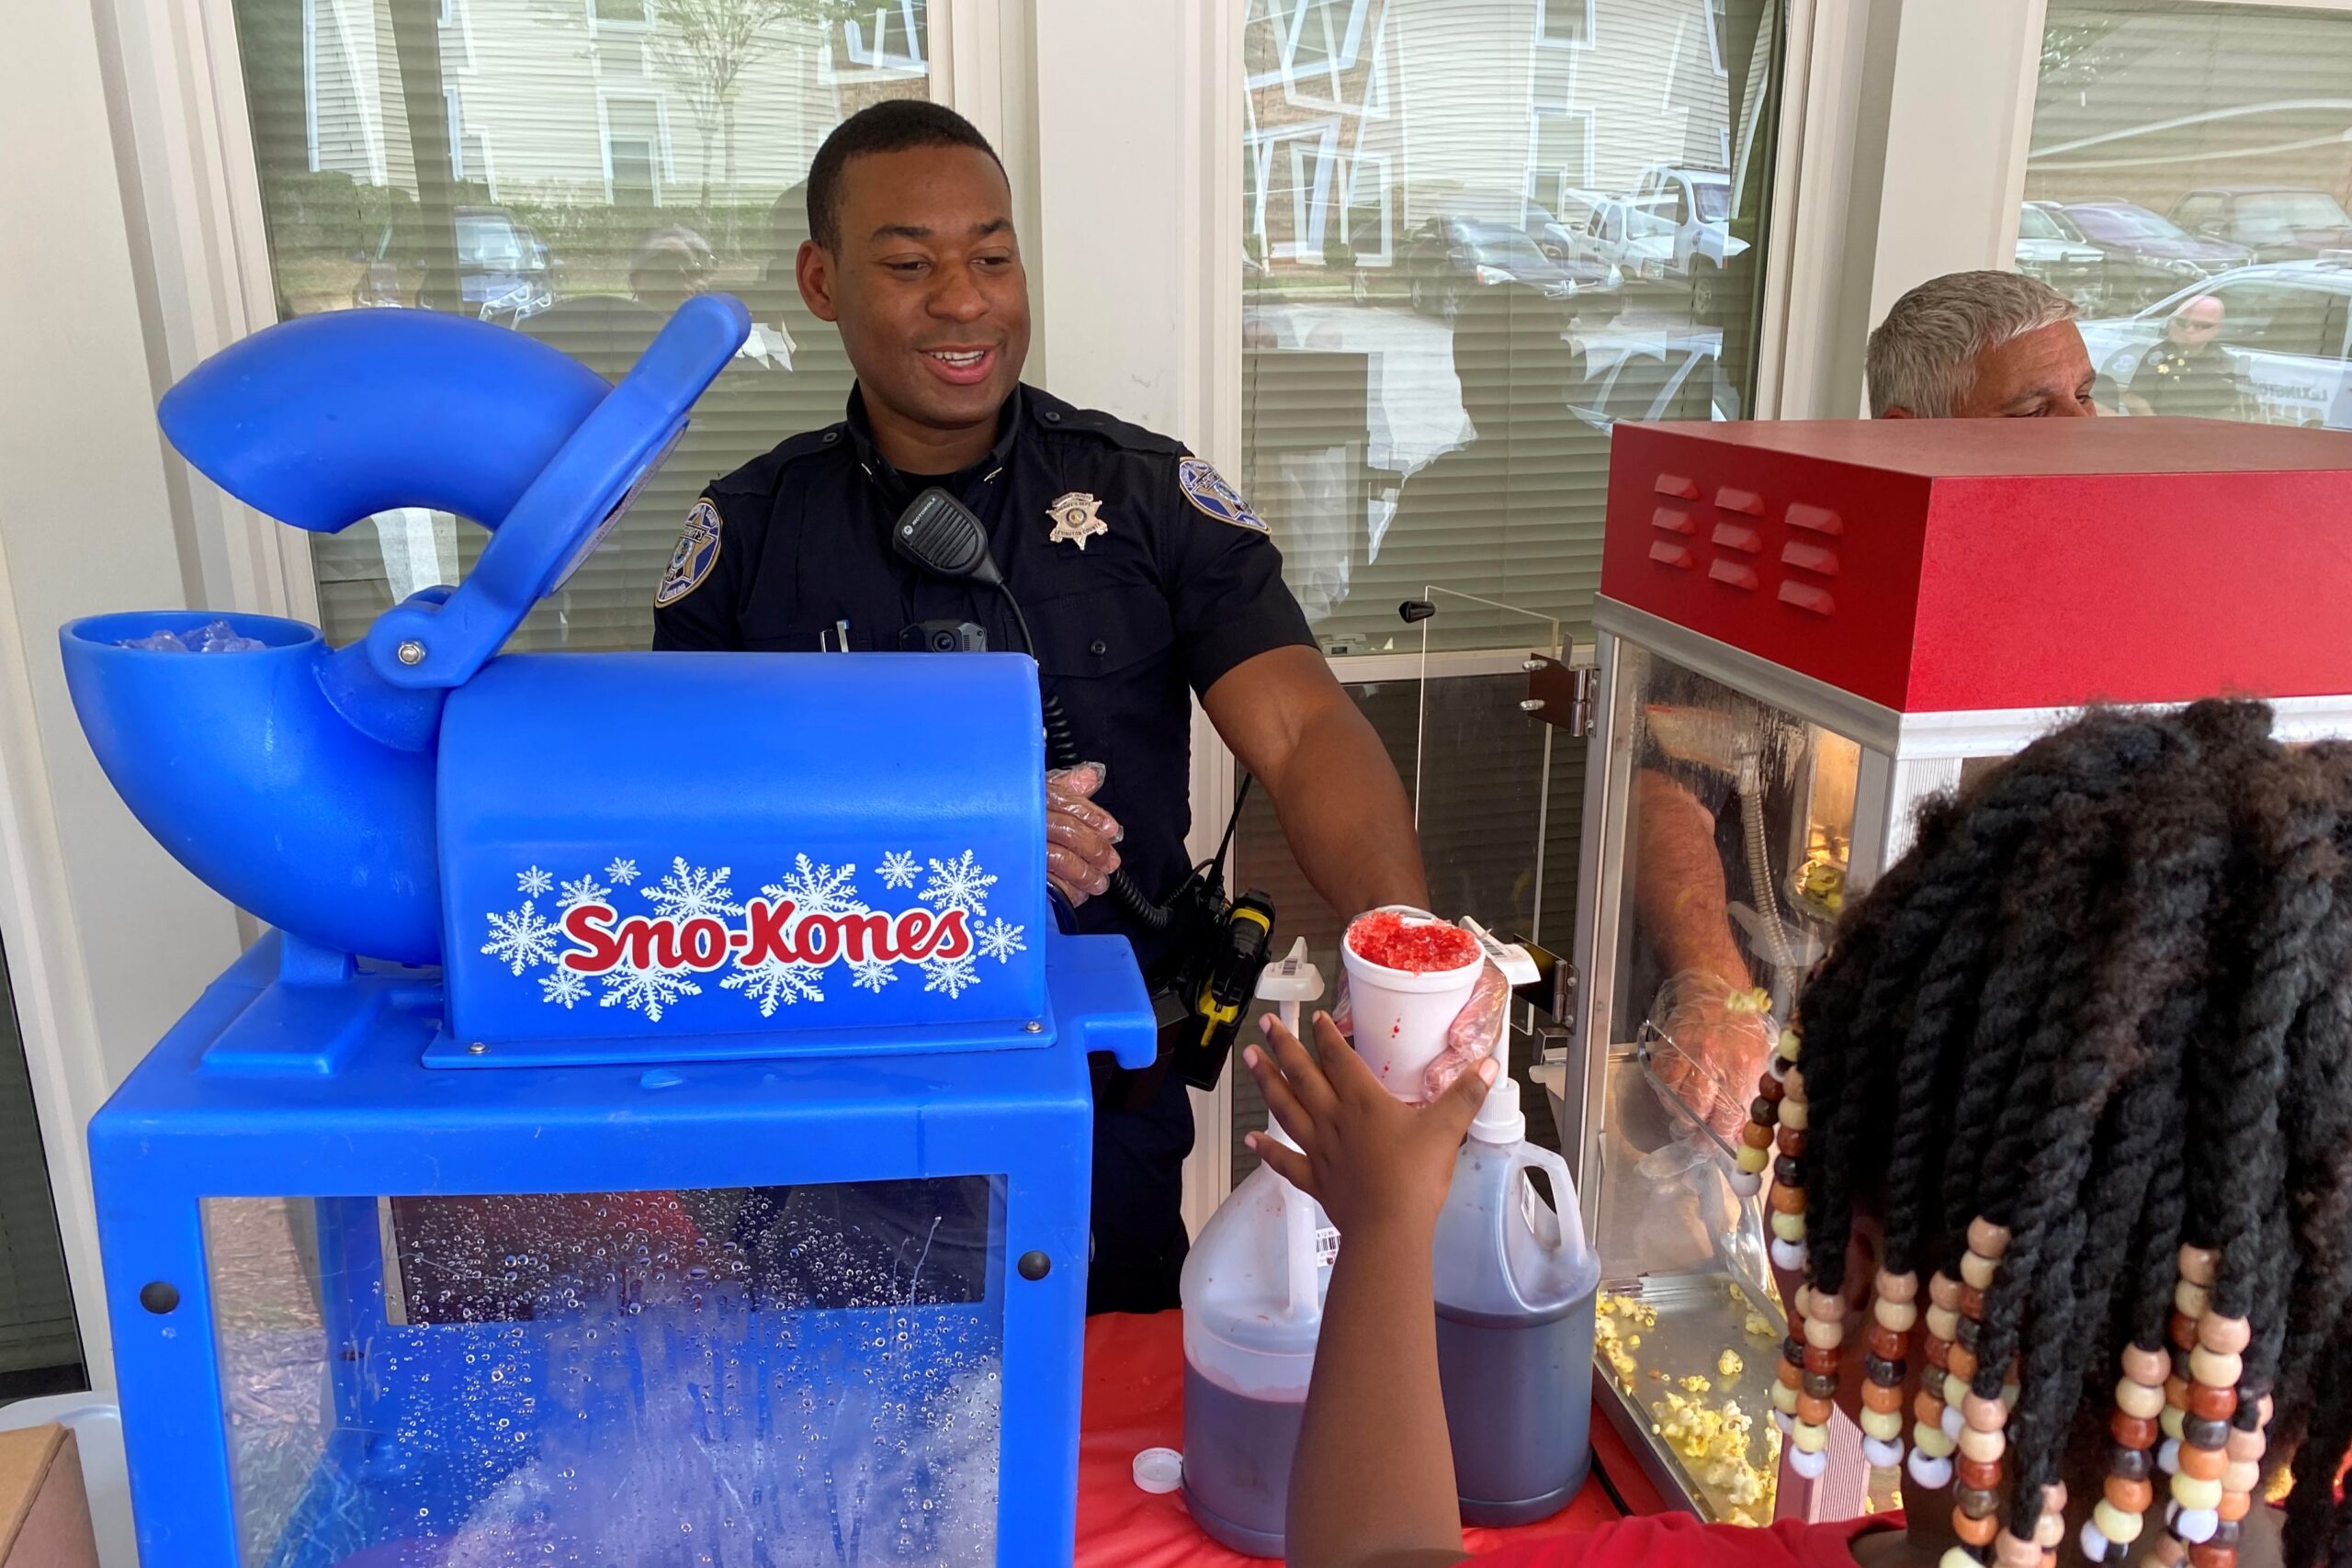 deputy serves sno cone to young girl